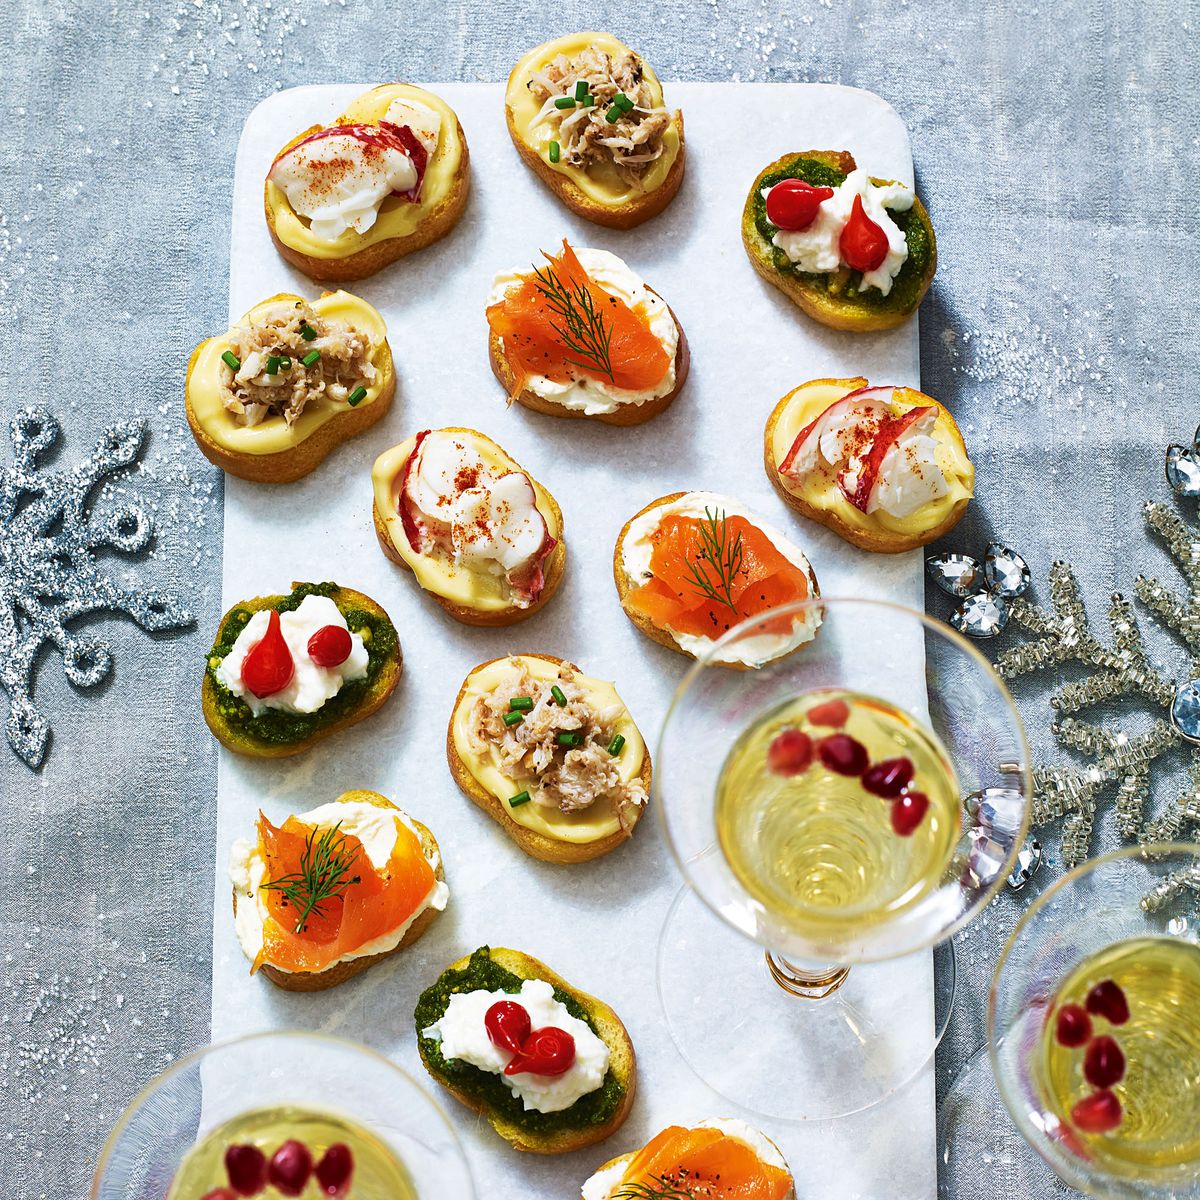 Be the perfect host by making some of these mouthwatering crostinis